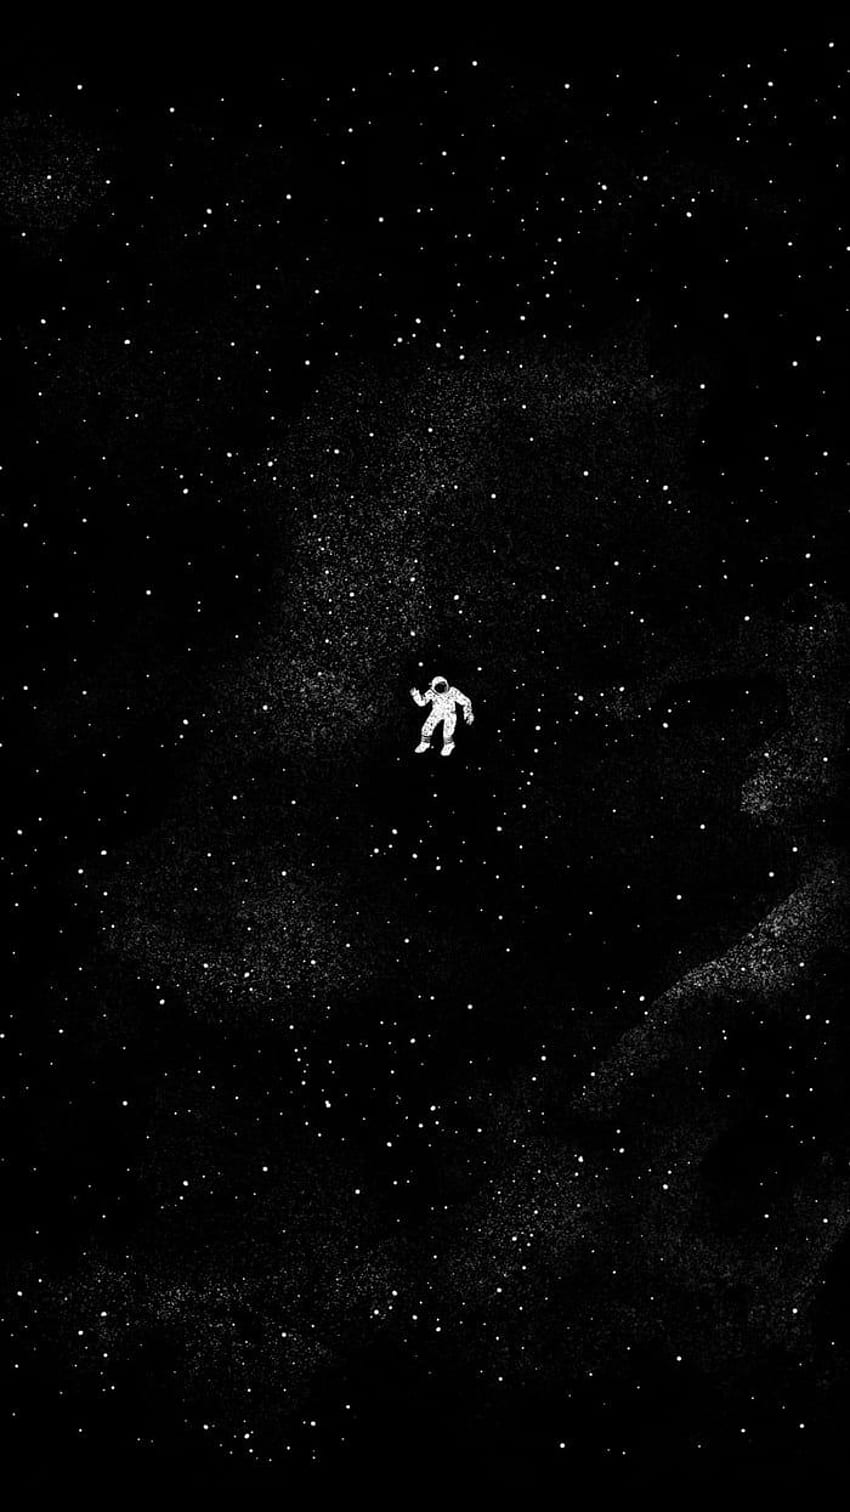 Astronaut floating in space Download at  httpwwwmyfavwallpapercom201712astronautfloating  Astronaut  wallpaper Outer space wallpaper Desktop wallpaper